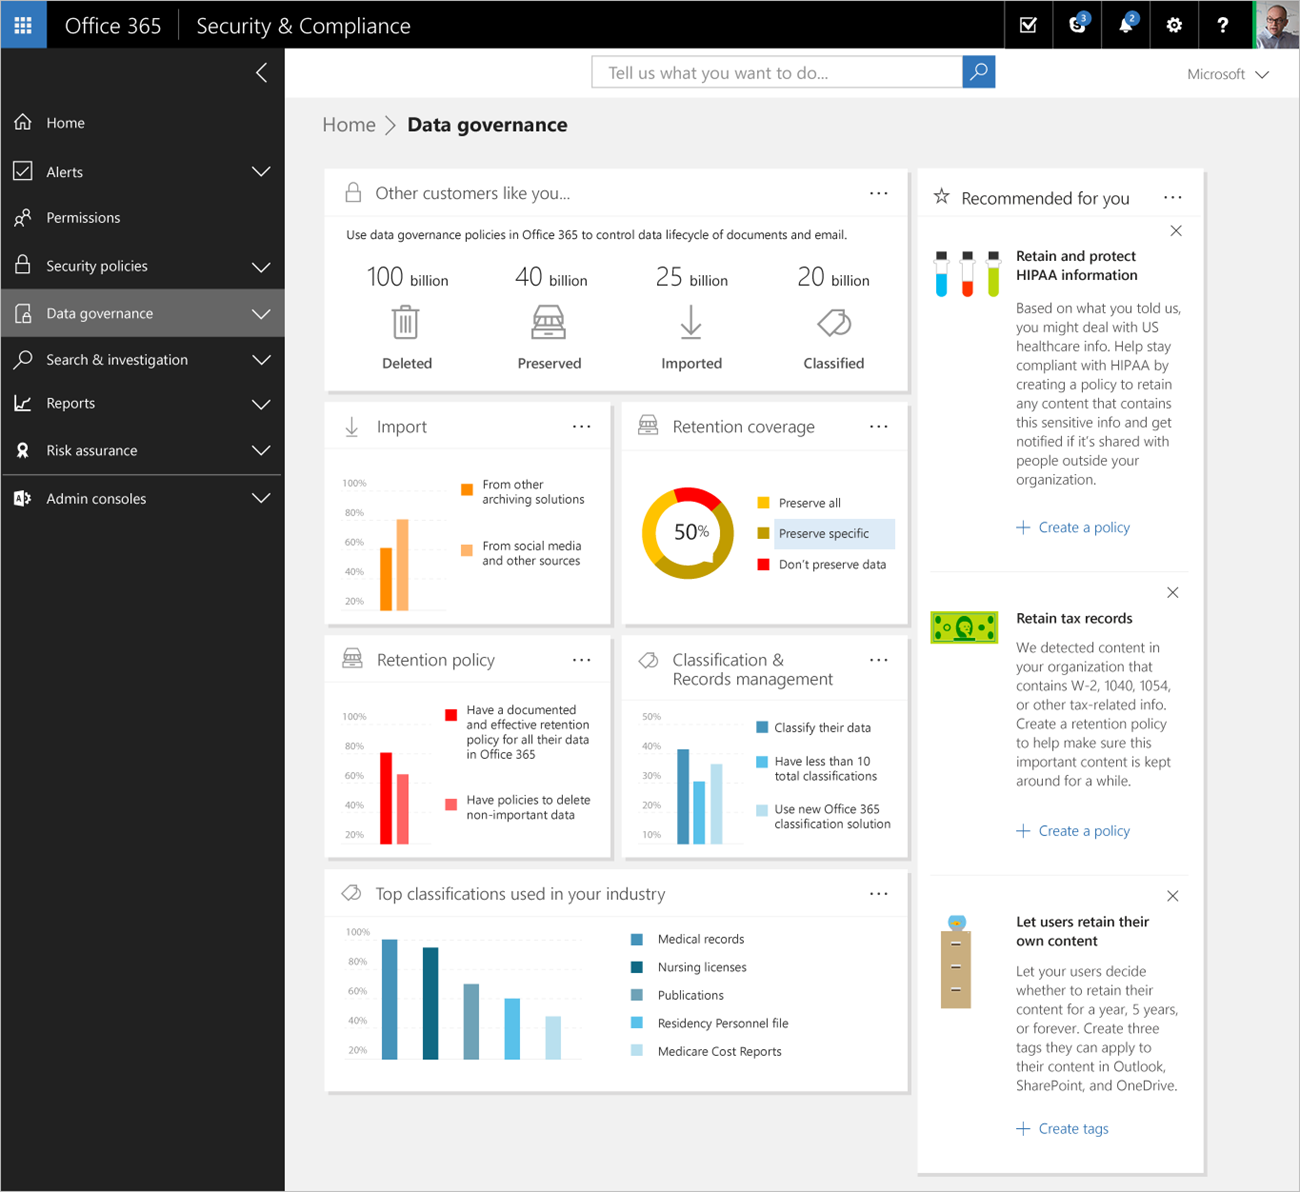 Office 365 Security Center